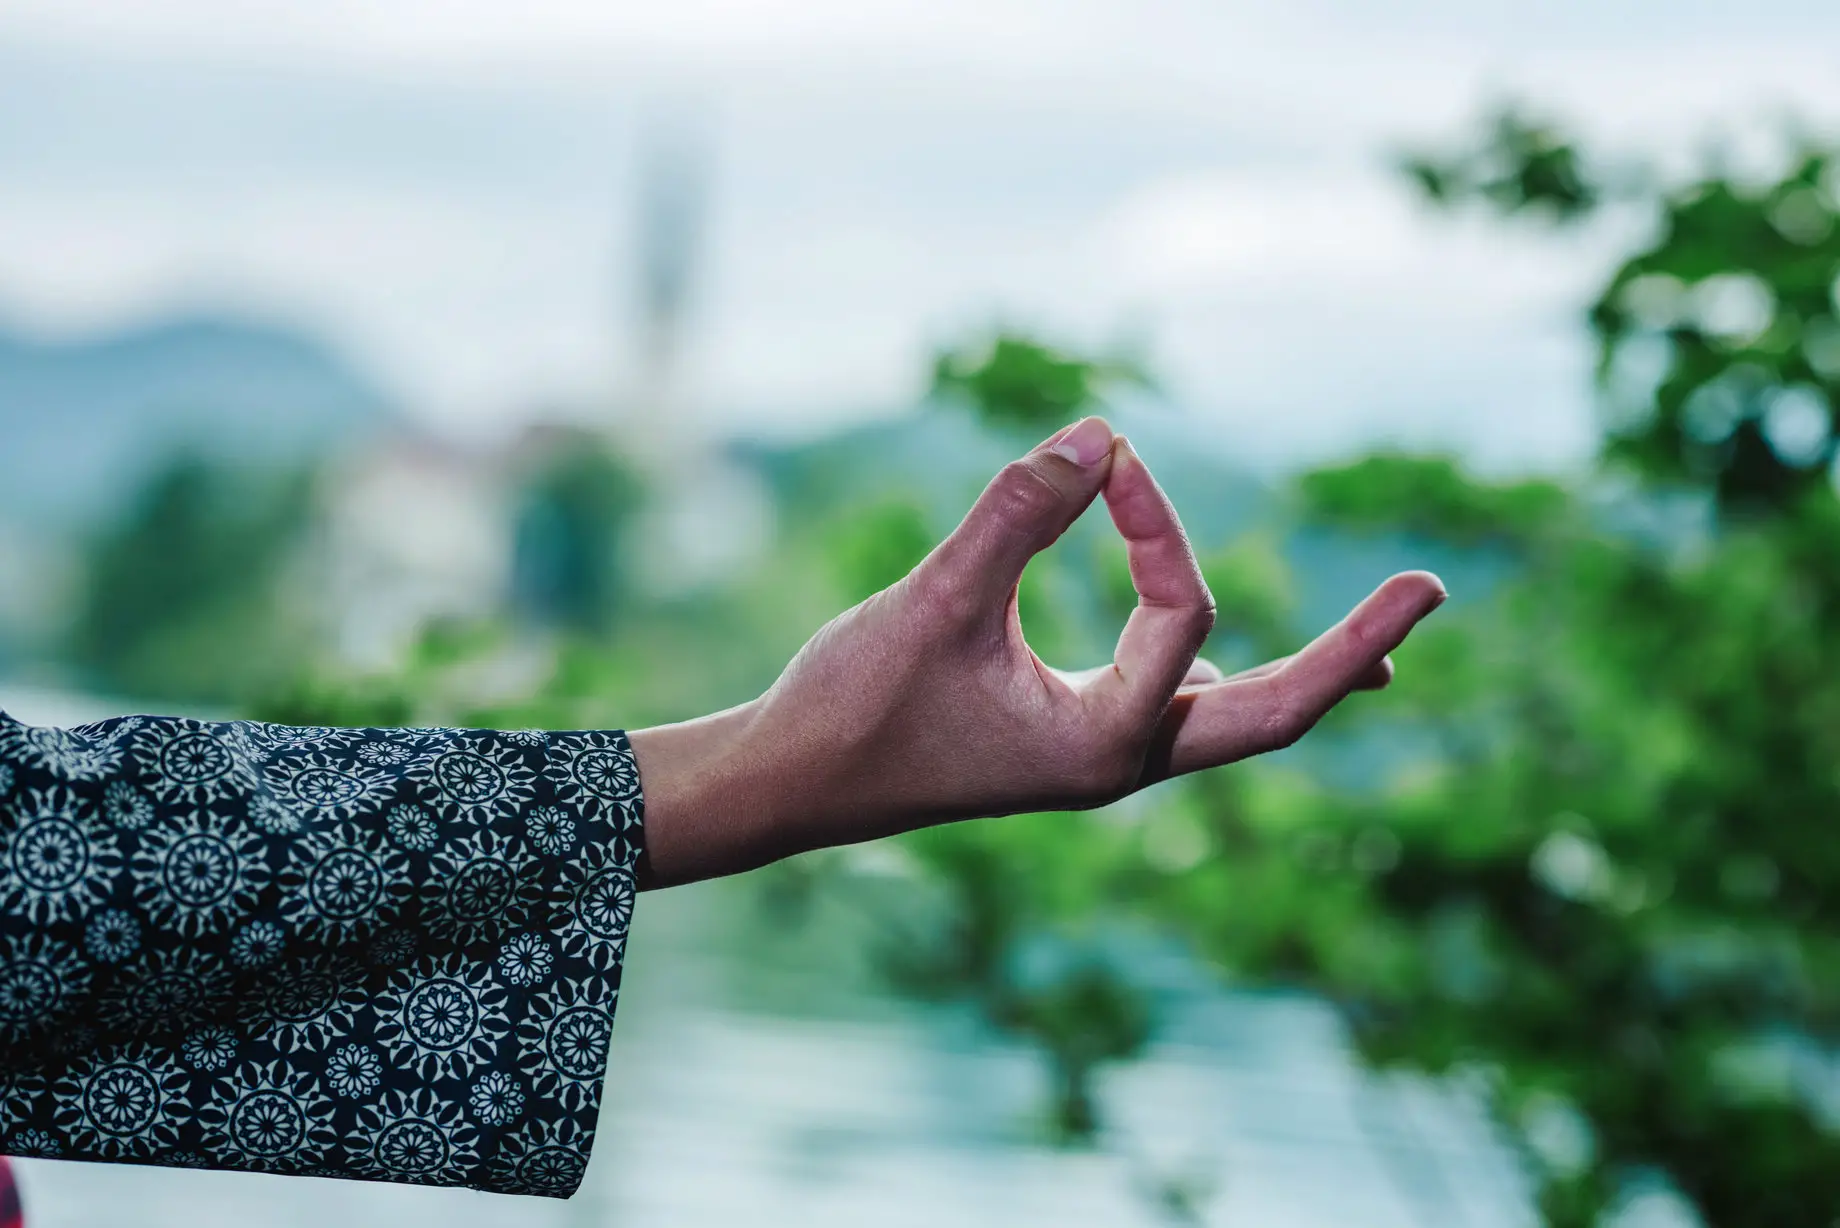 5 Quick Tips To Start Your Meditation Practice During a Health Crisis